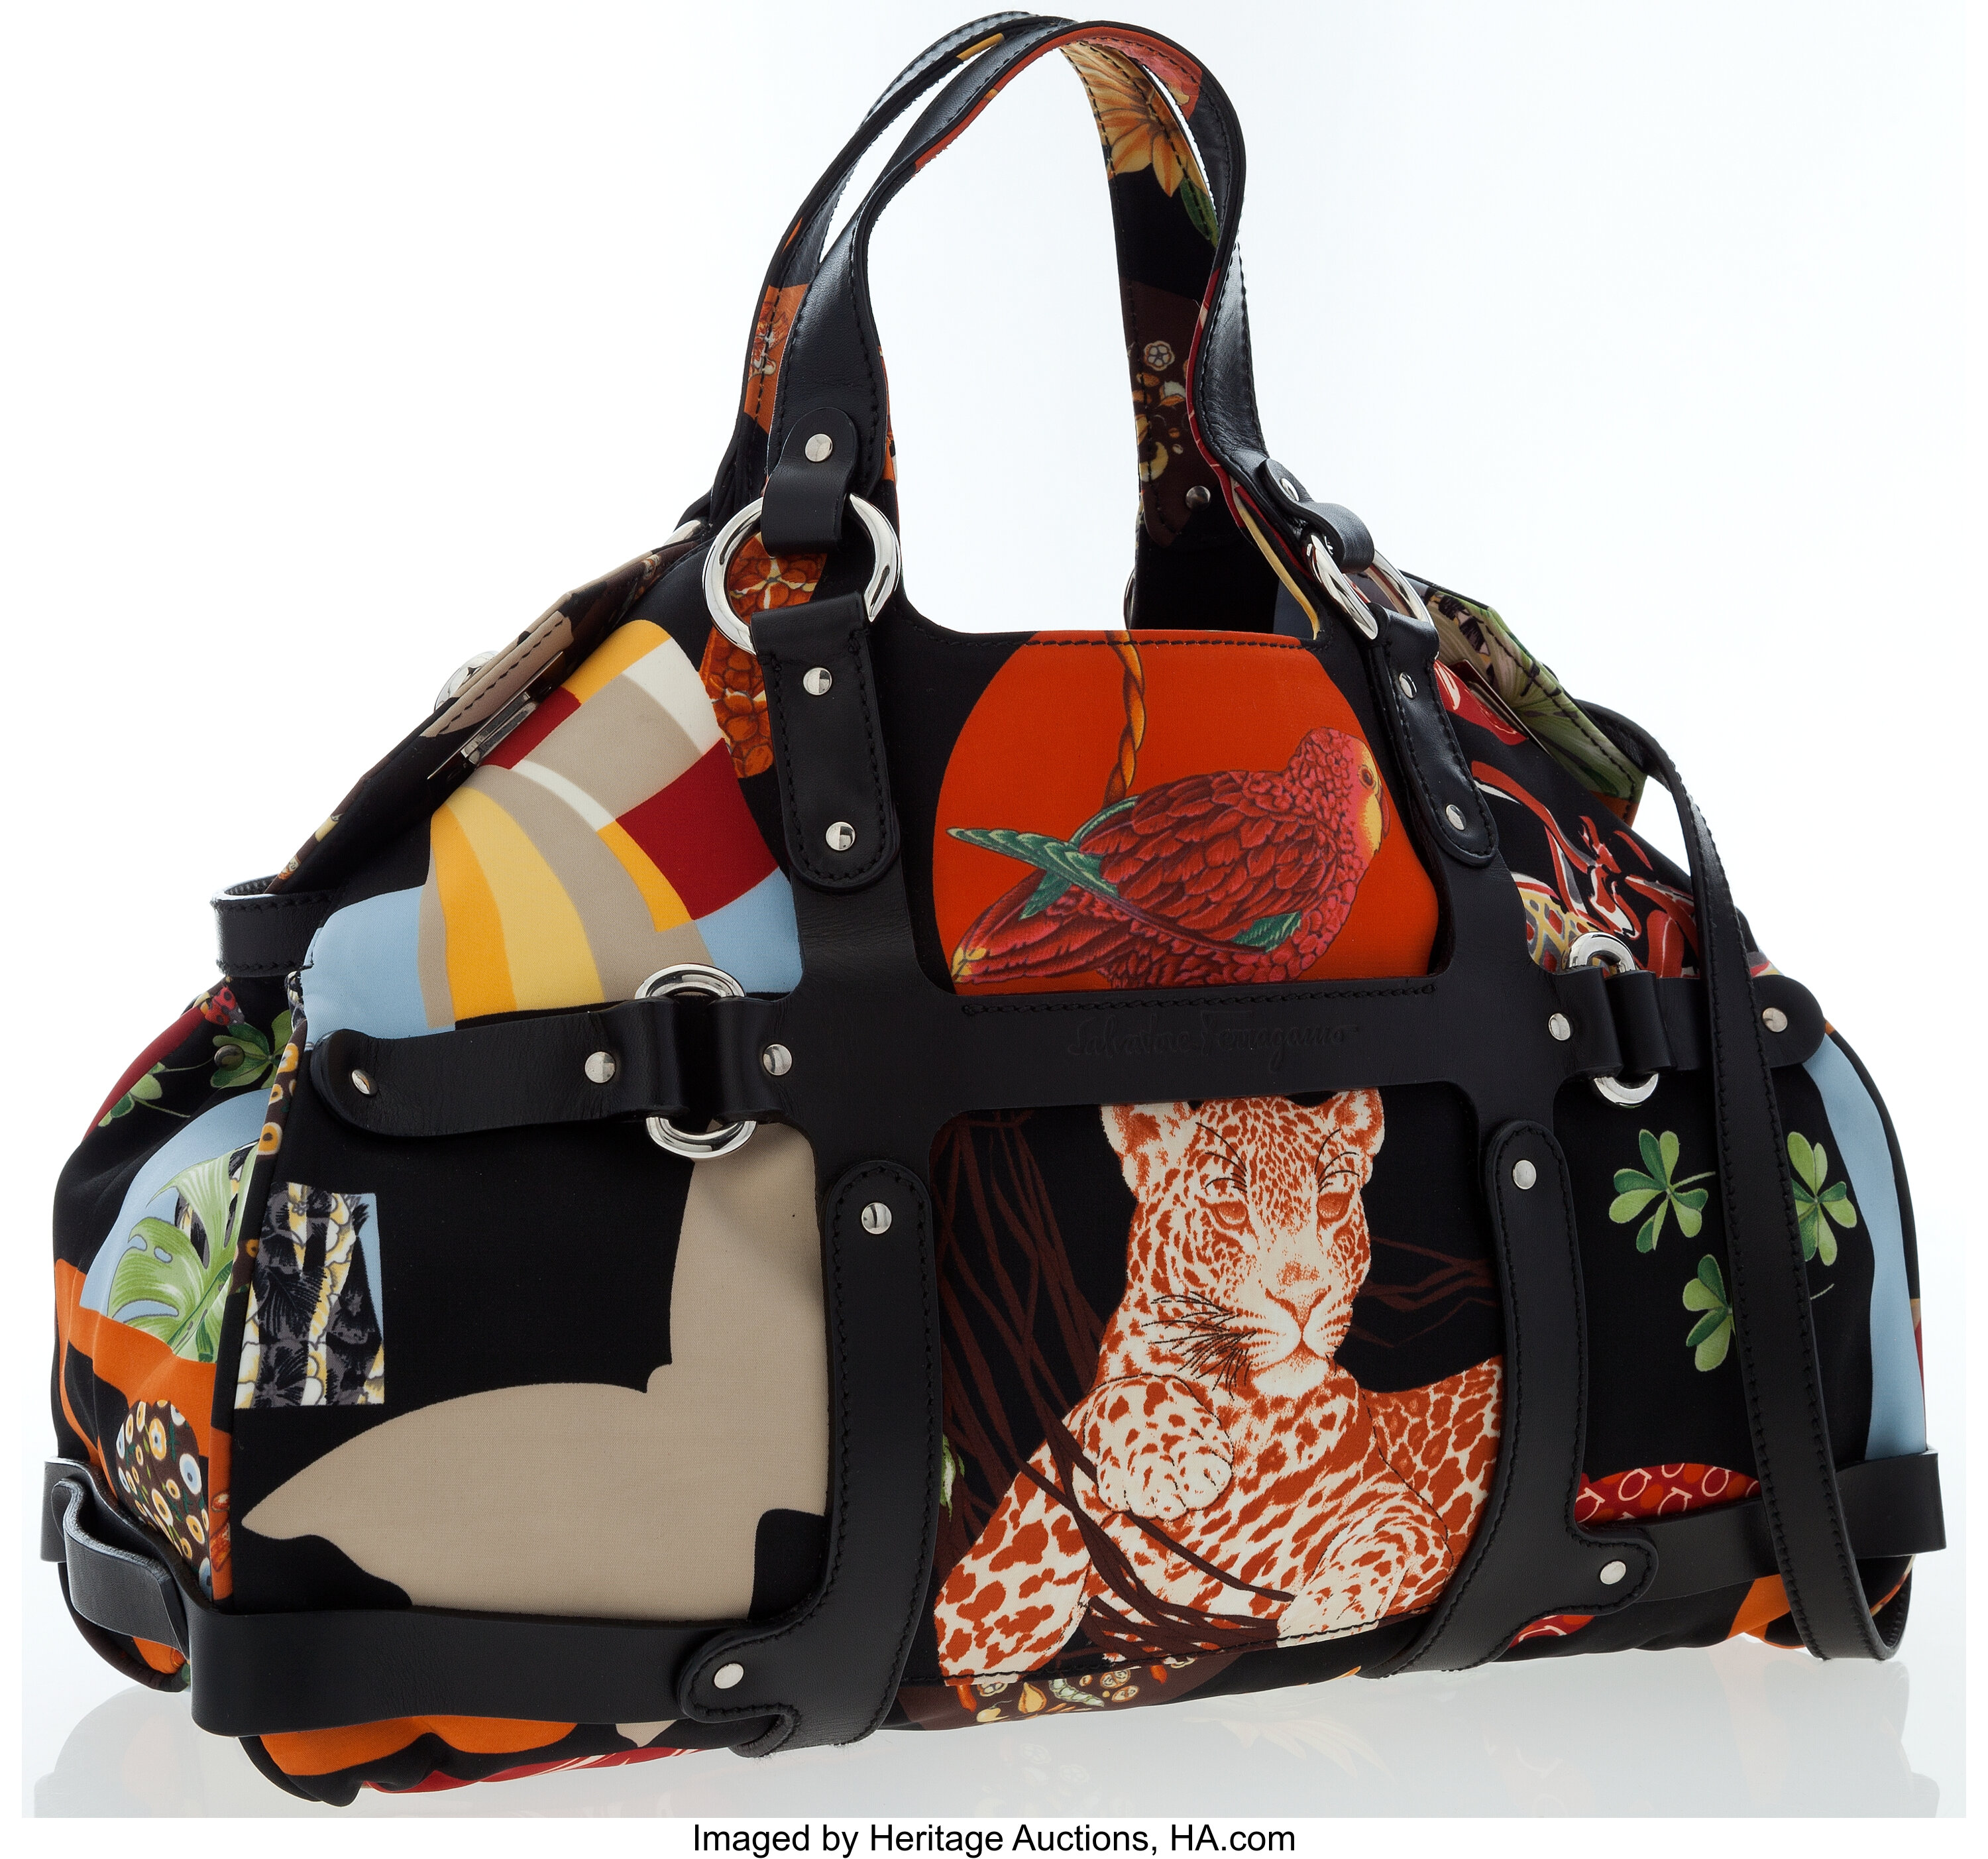 Salvatore Ferragamo Other pattern Bags for Sale in Online Auctions